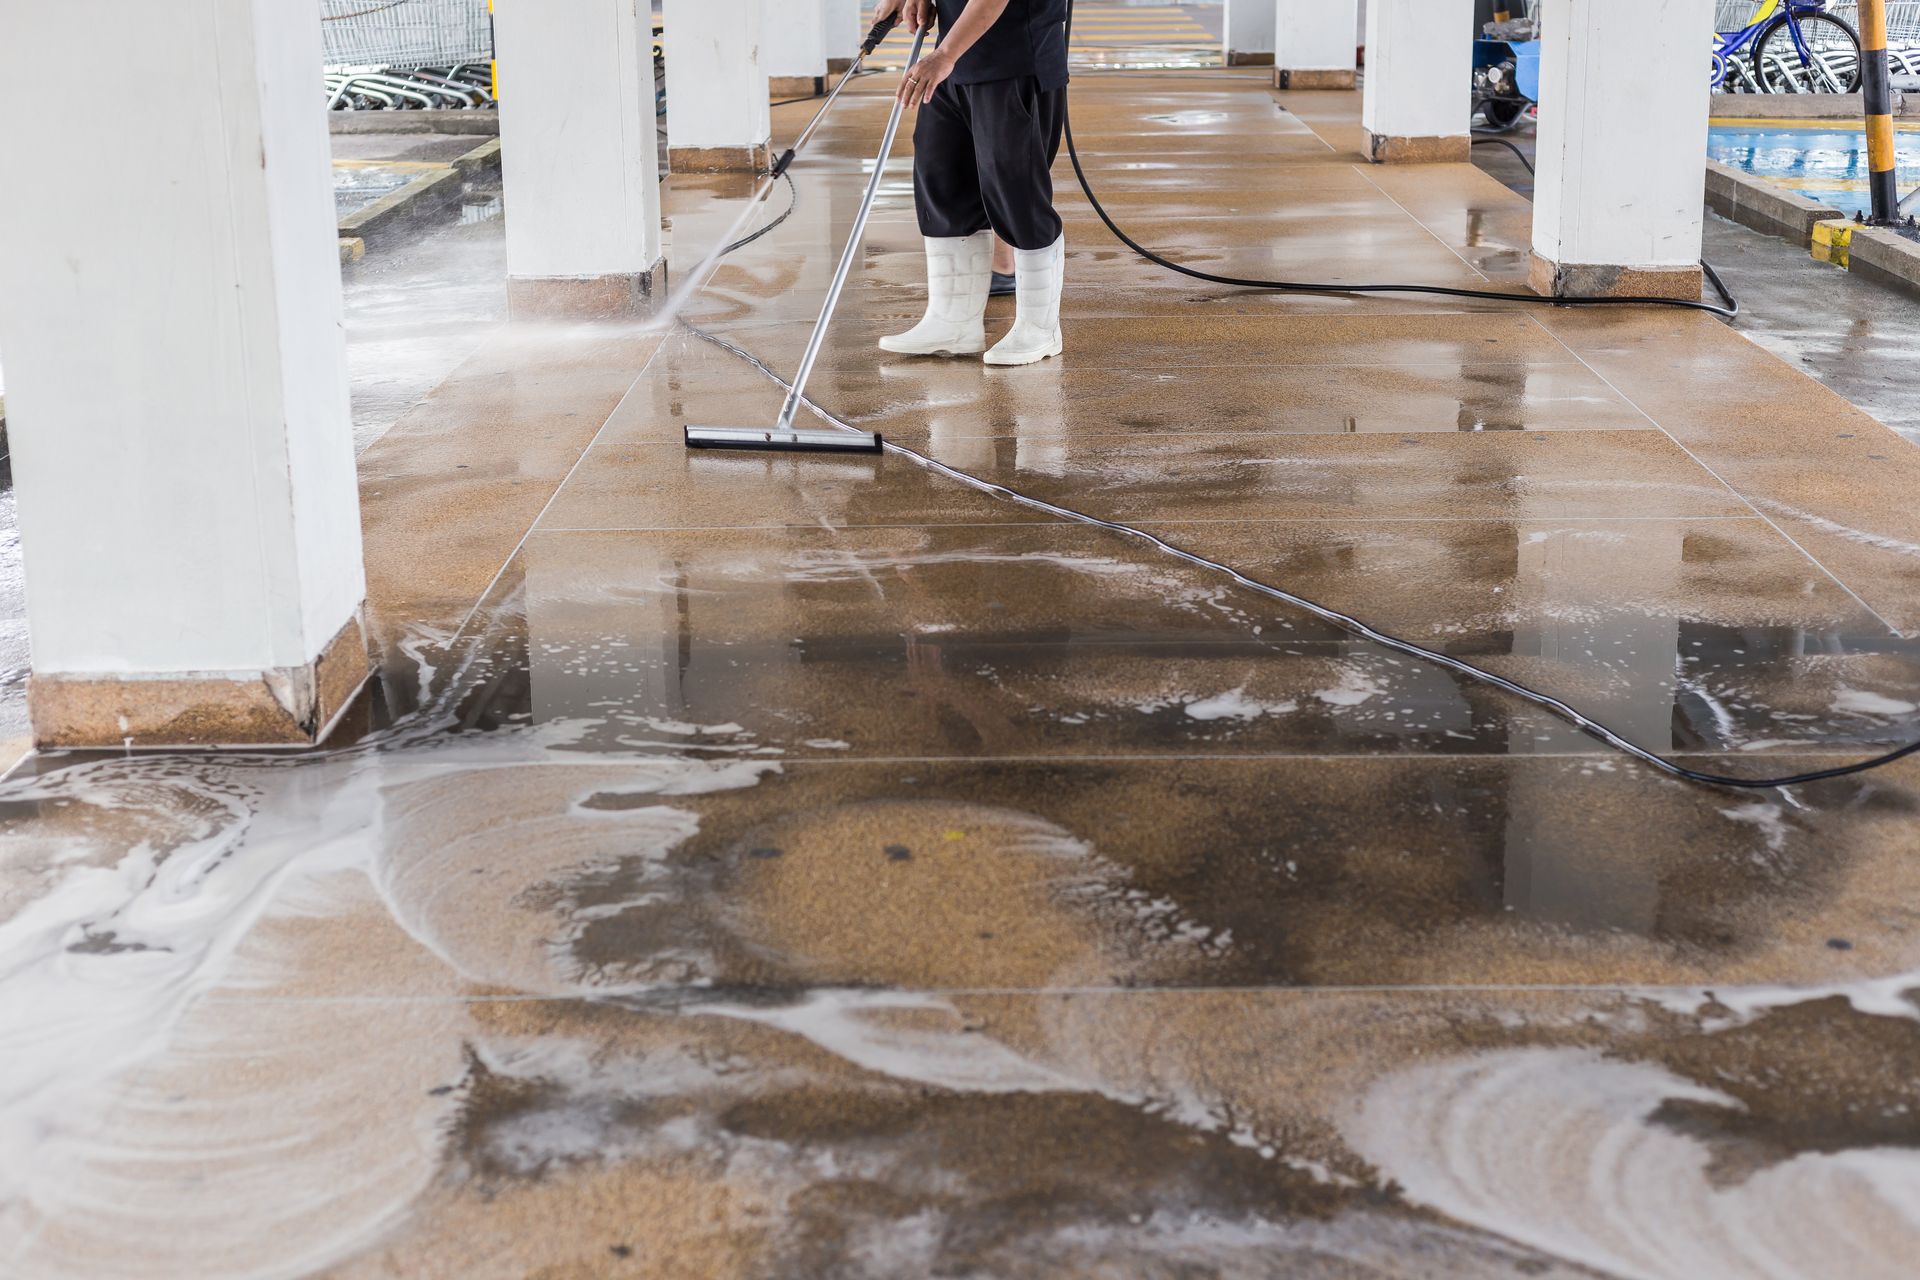 a person is cleaning a stained floor